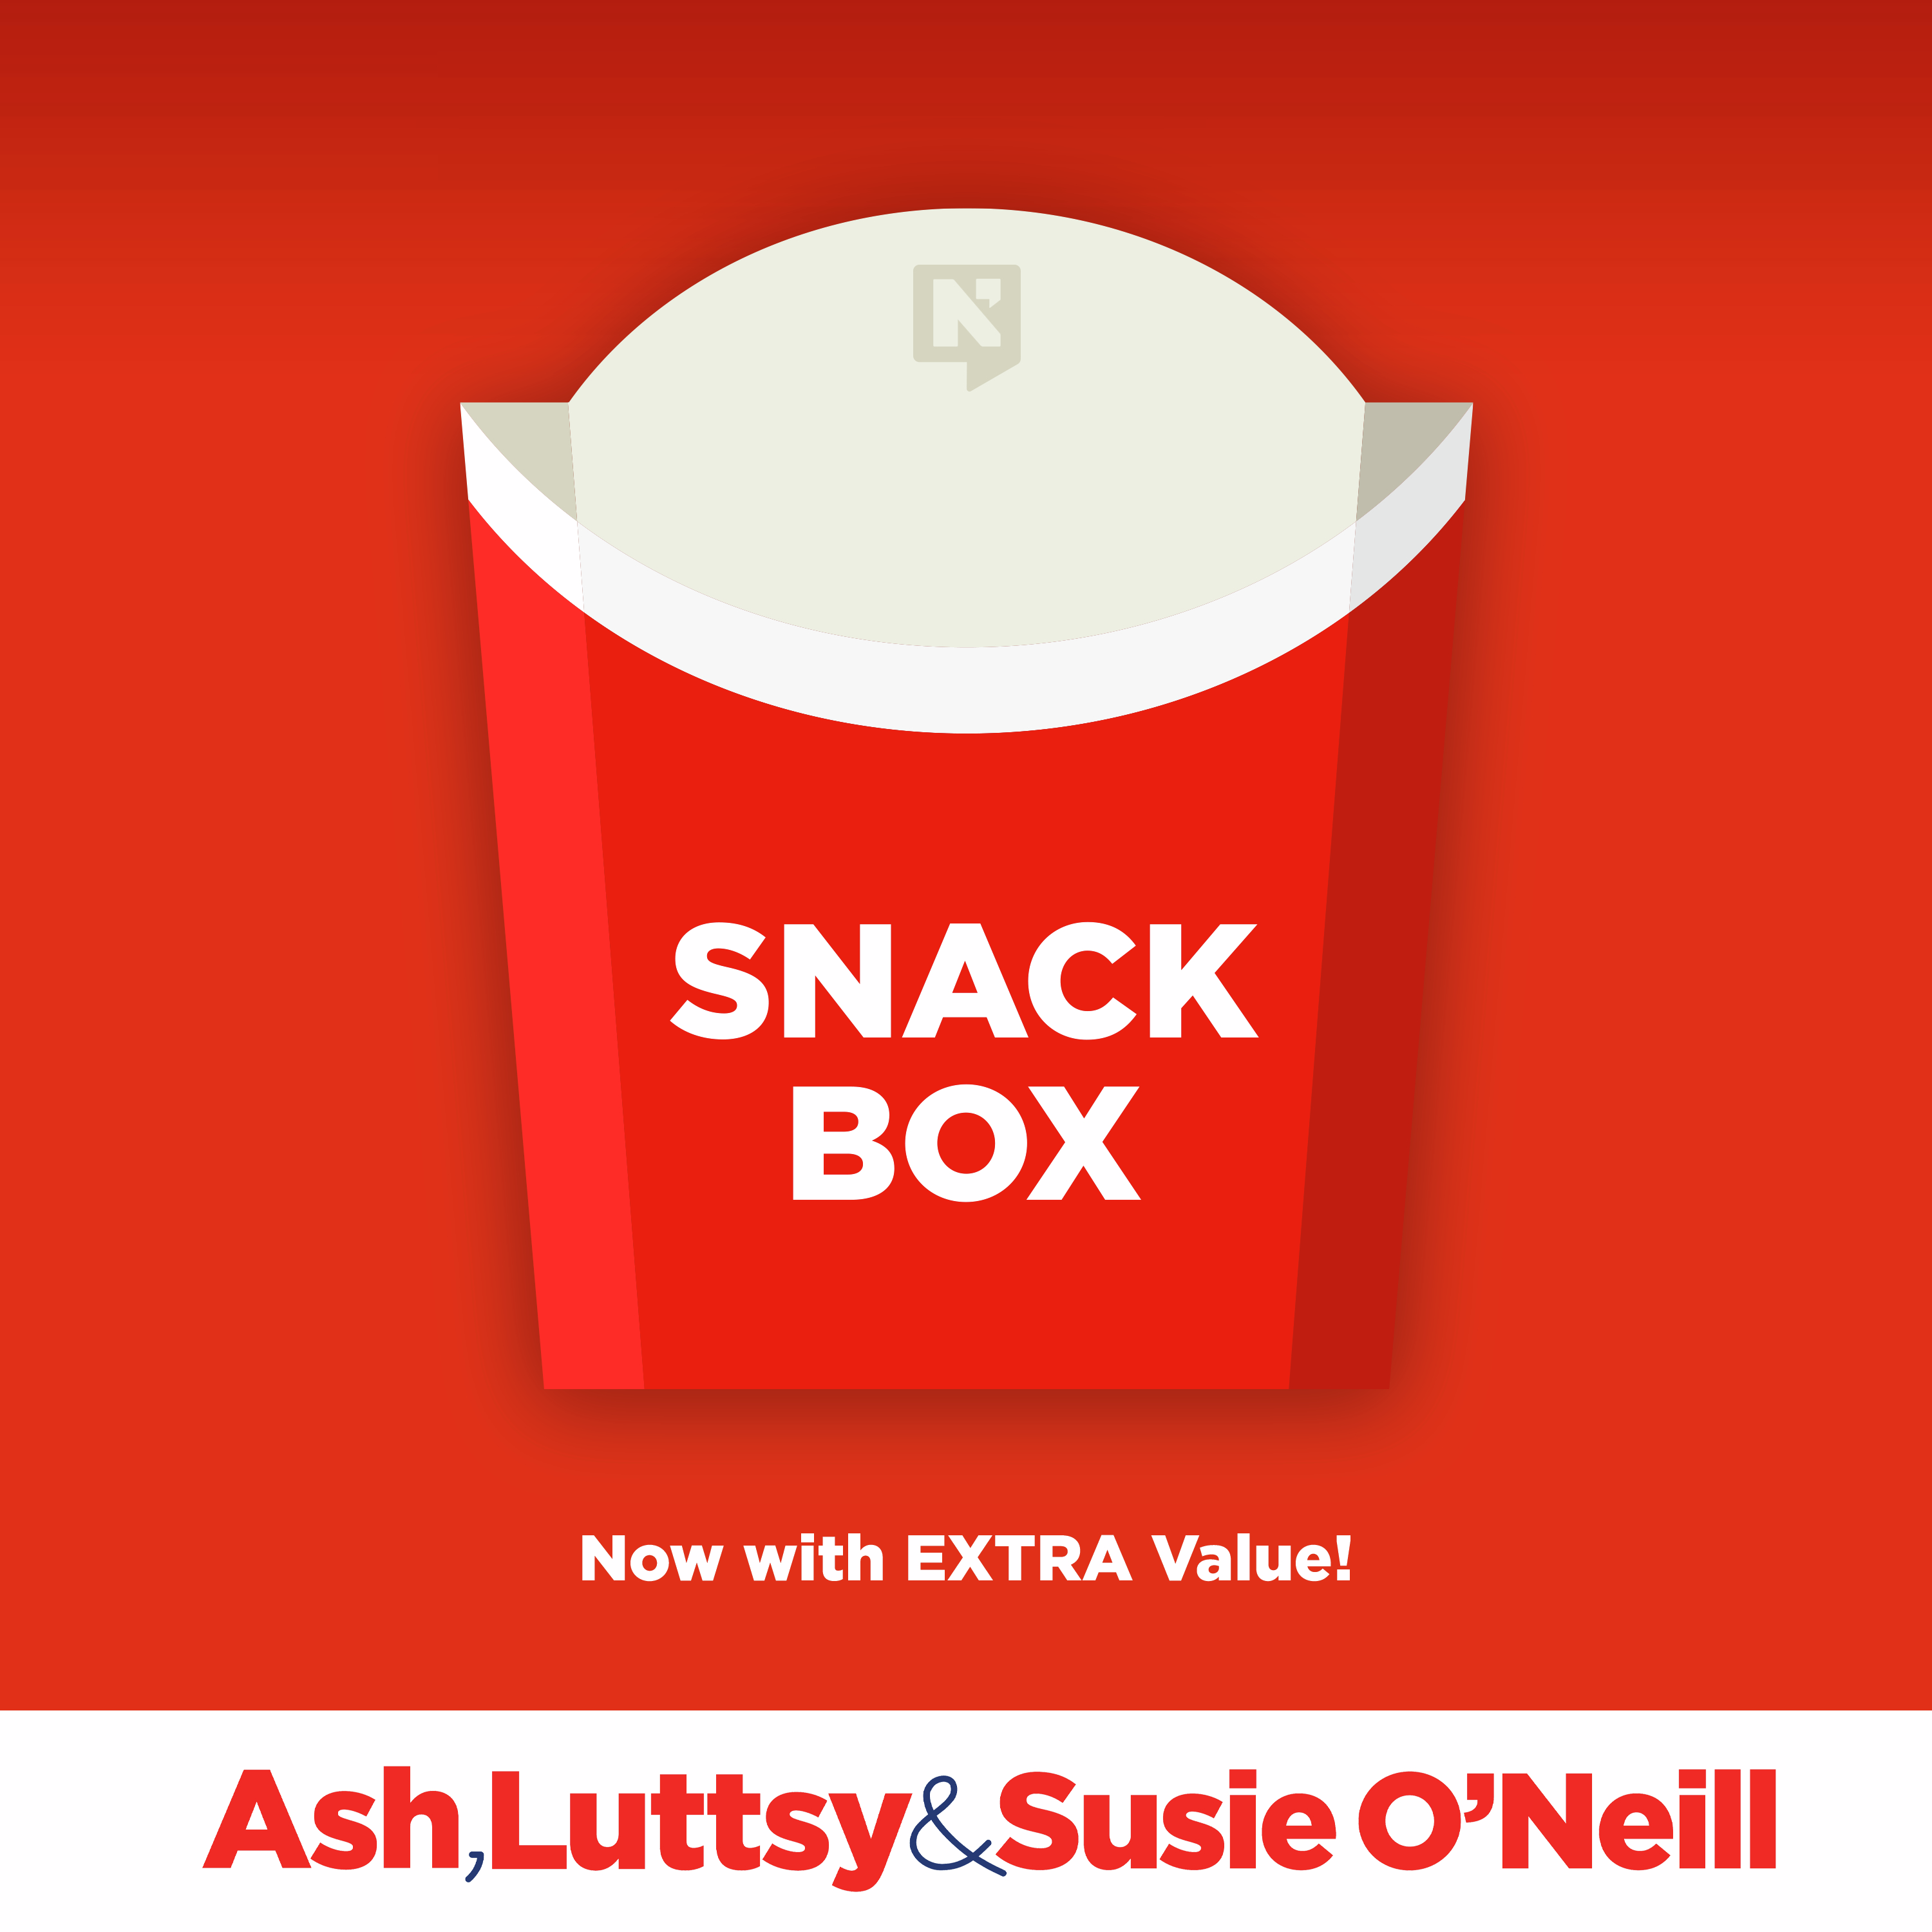 The Ash, Luttsy and Susie Snackbox | Tuesday 18th June